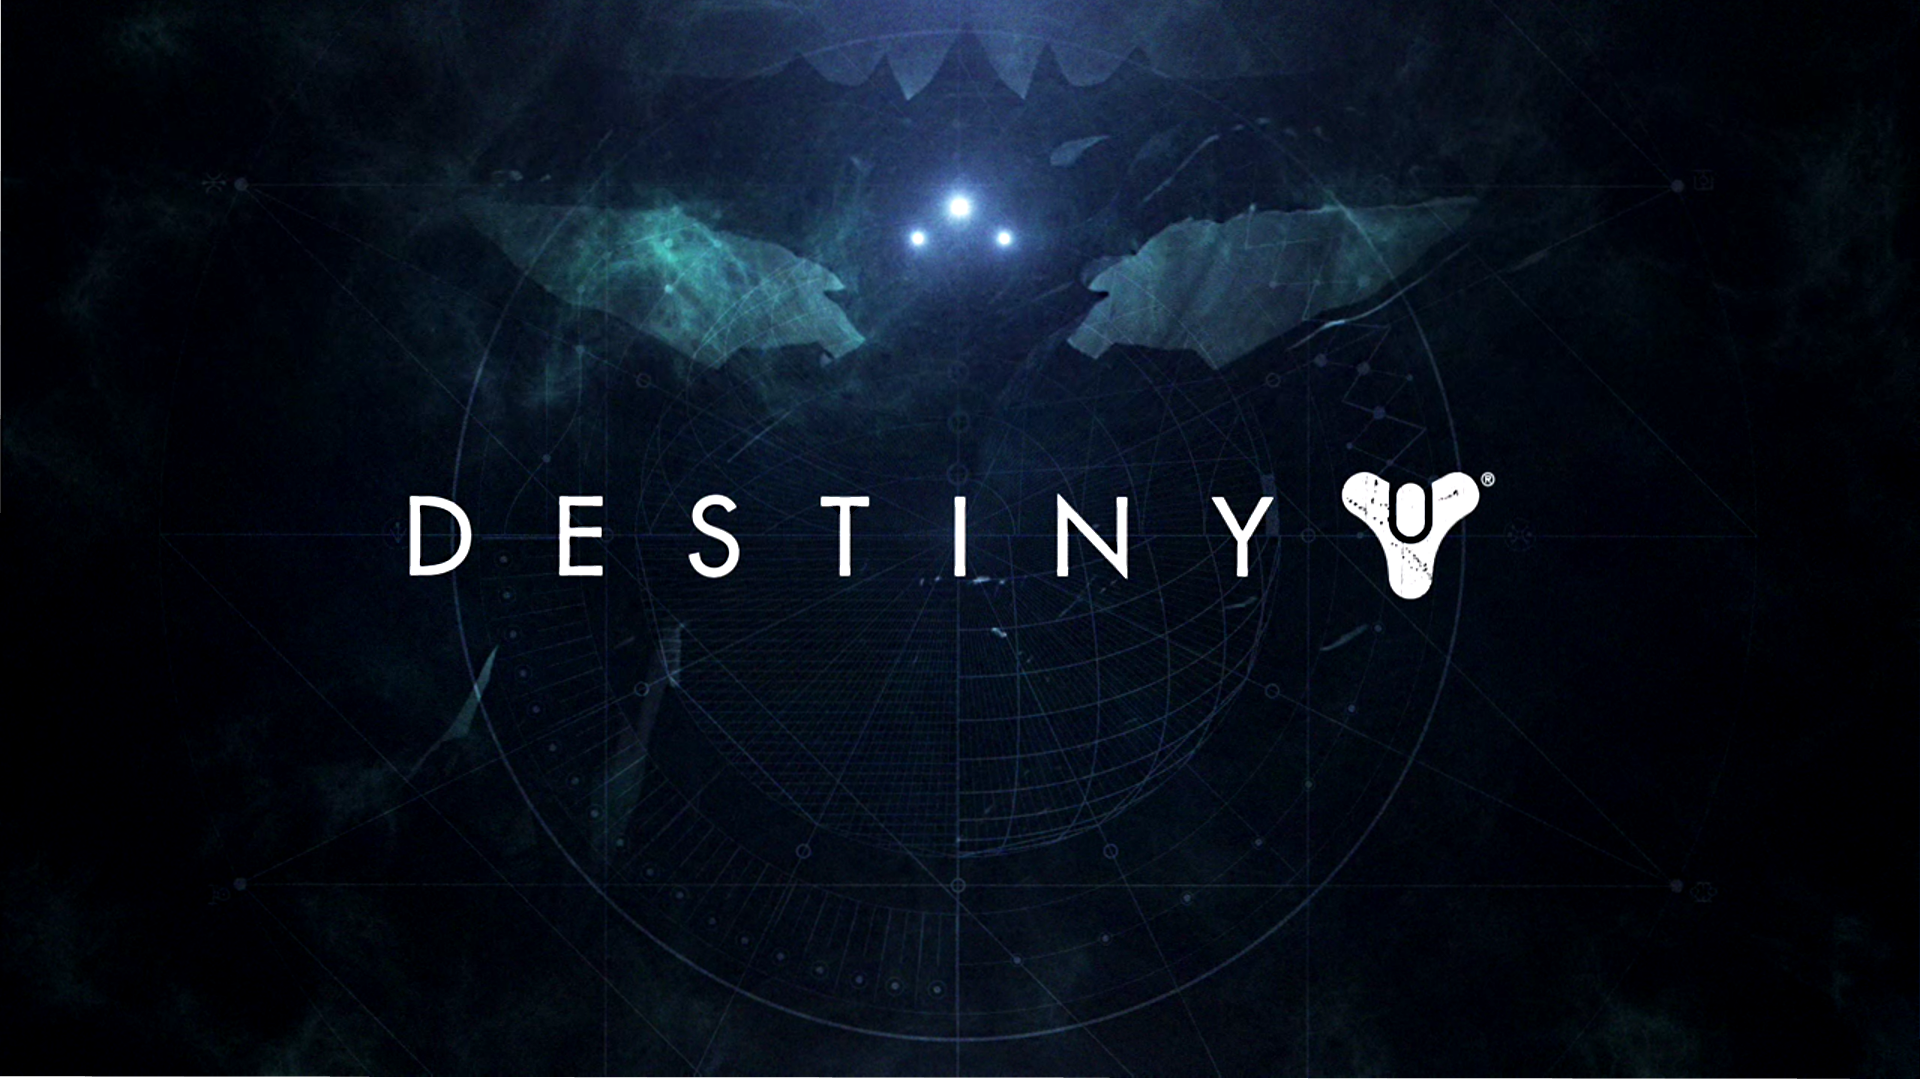  Destiny update is out I wanted to share this awesome wallpaper with 1920x1079